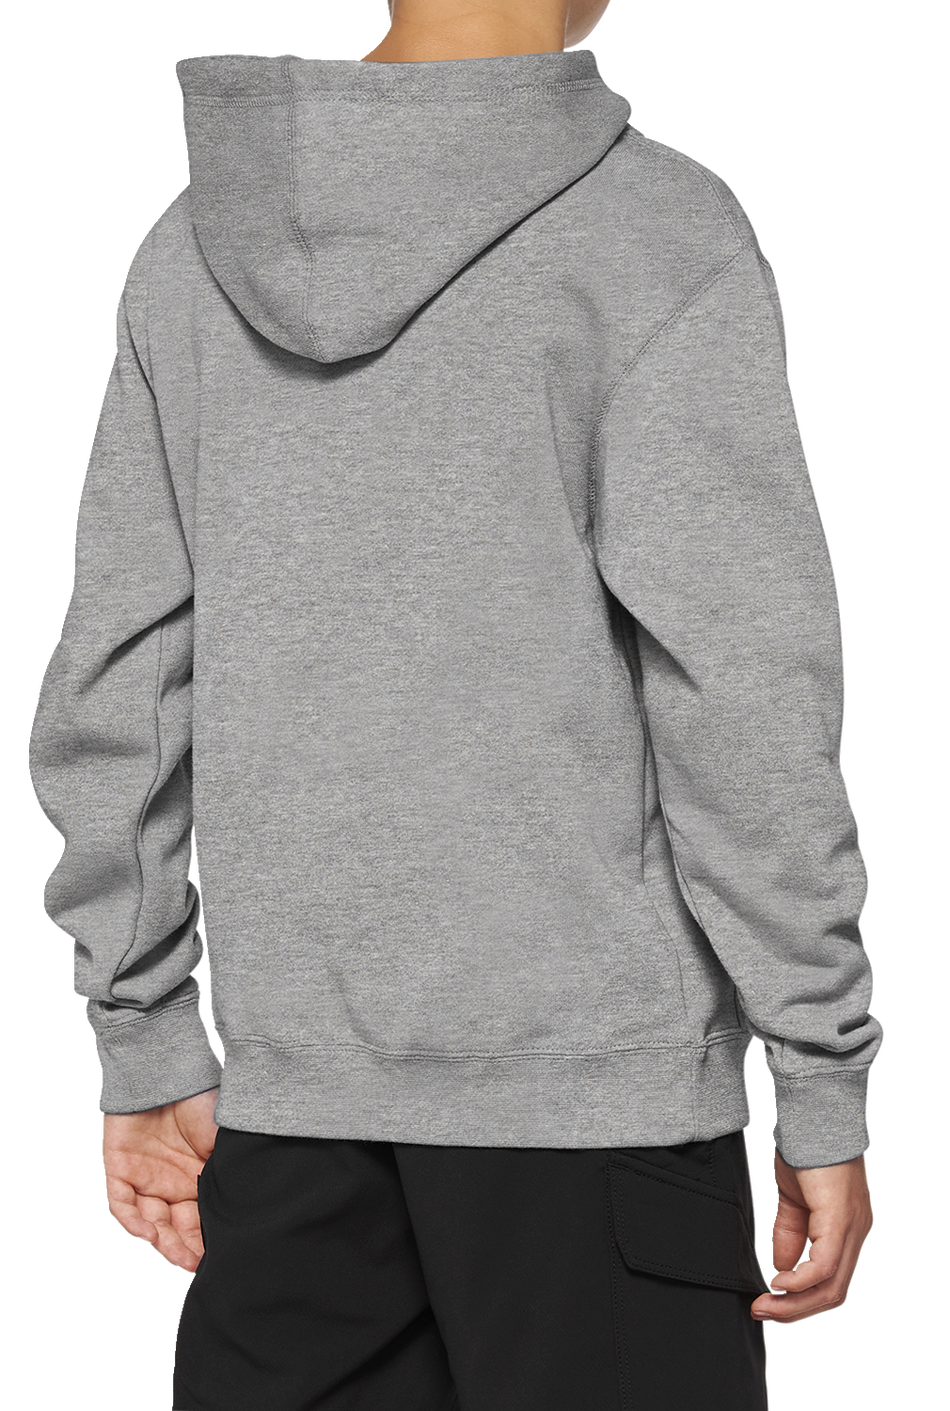 100% Youth Icon Hoodie - Gray - Small 20030-00004